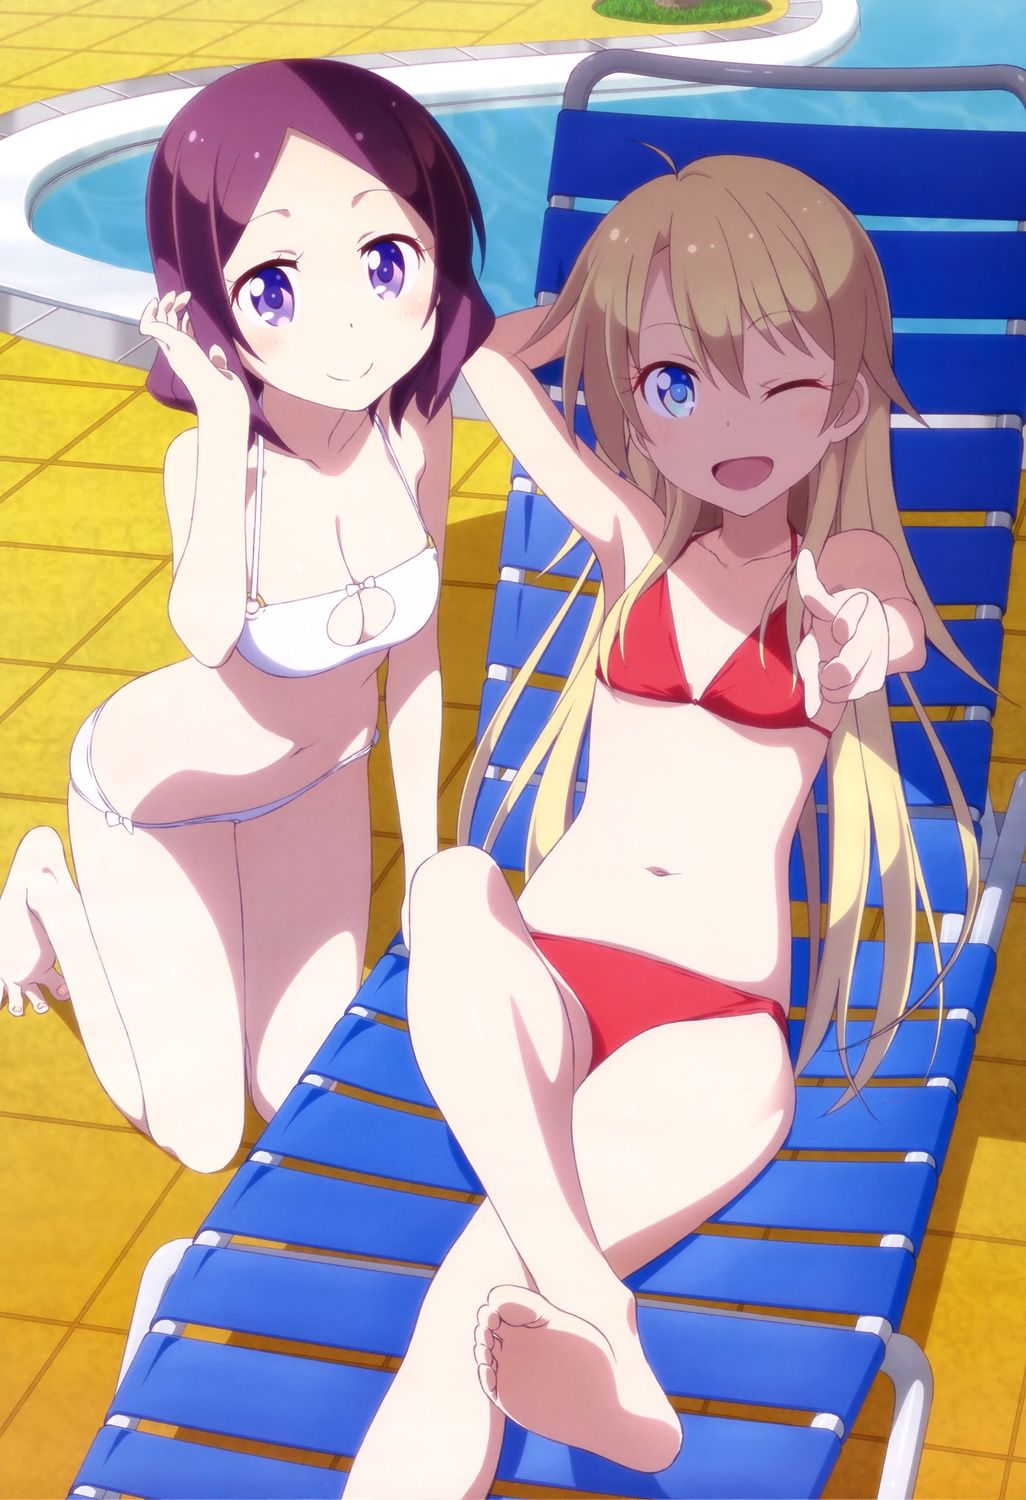 [Image is: "NEW GAME! ' Rin-Chan and コウ of coupling the optimal high wwwwwww 2